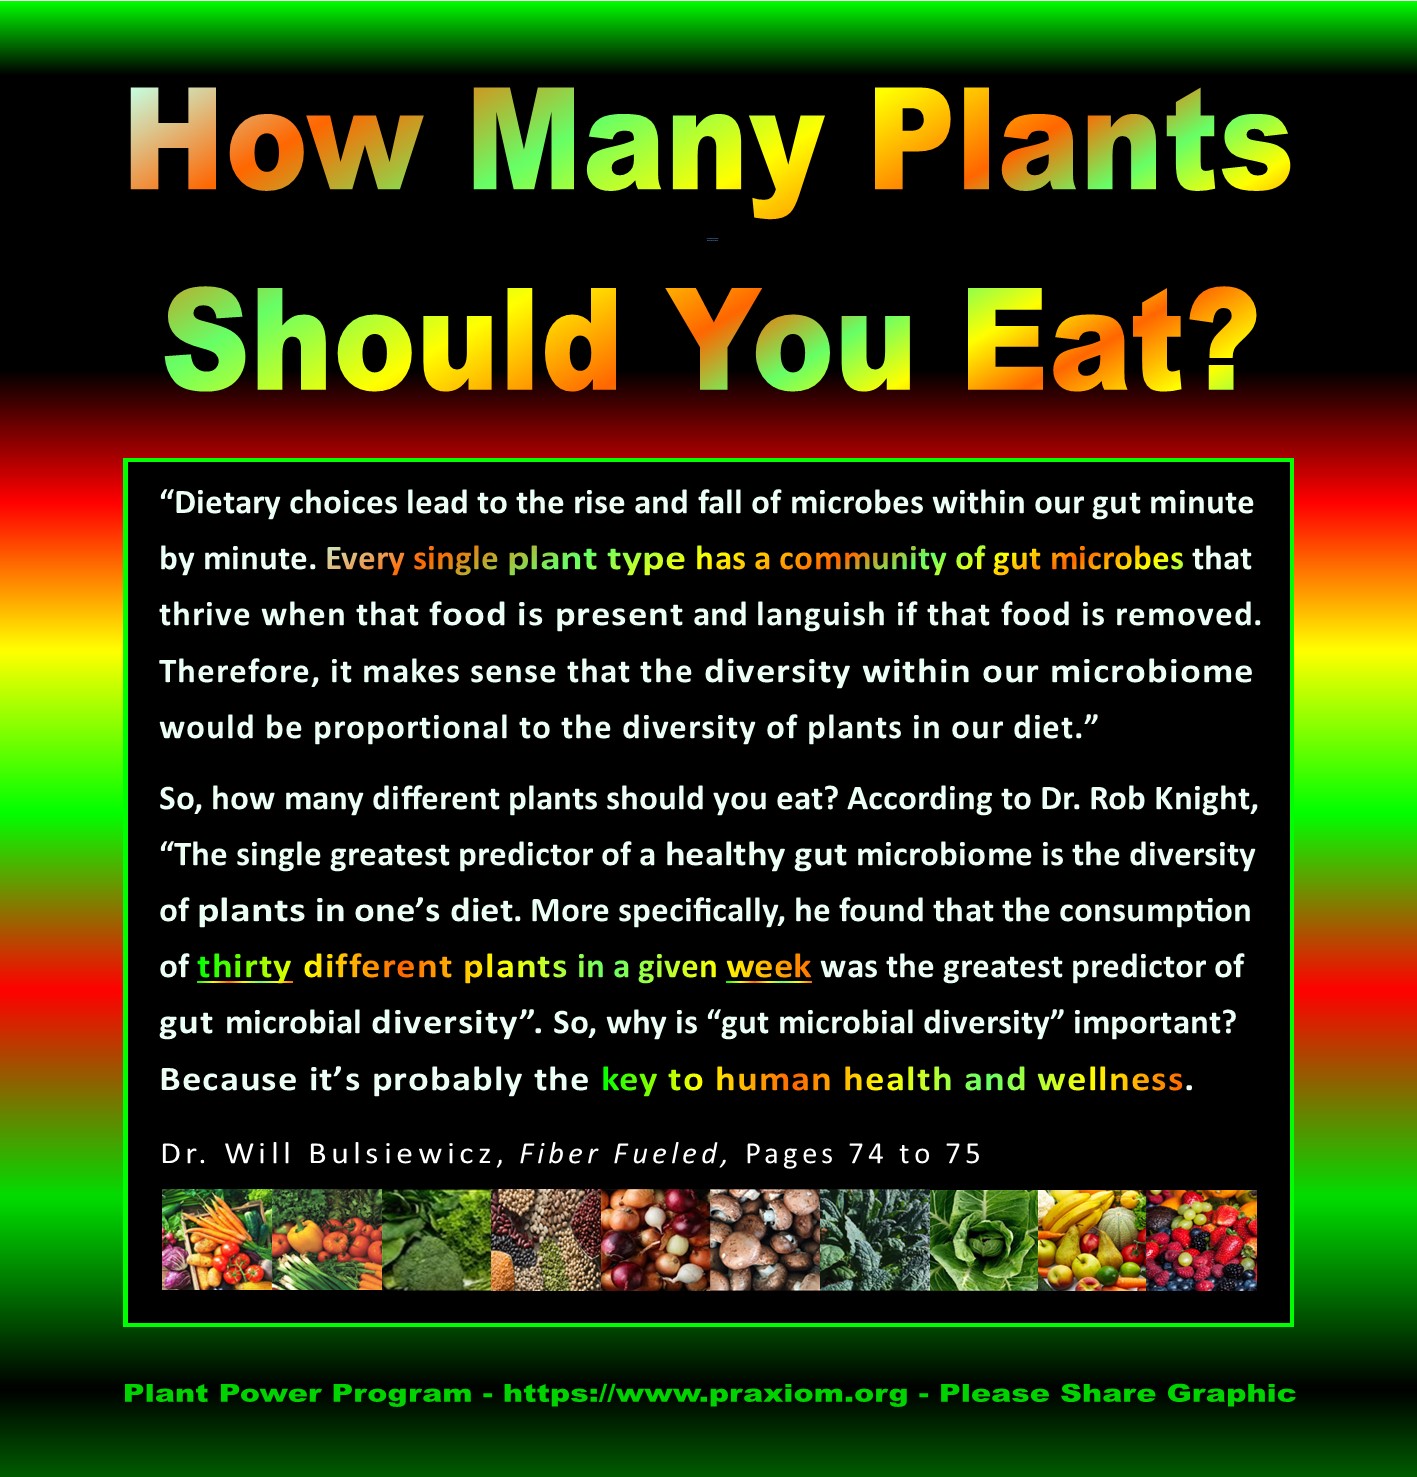 How Many Different
        Plants Should You Eat?